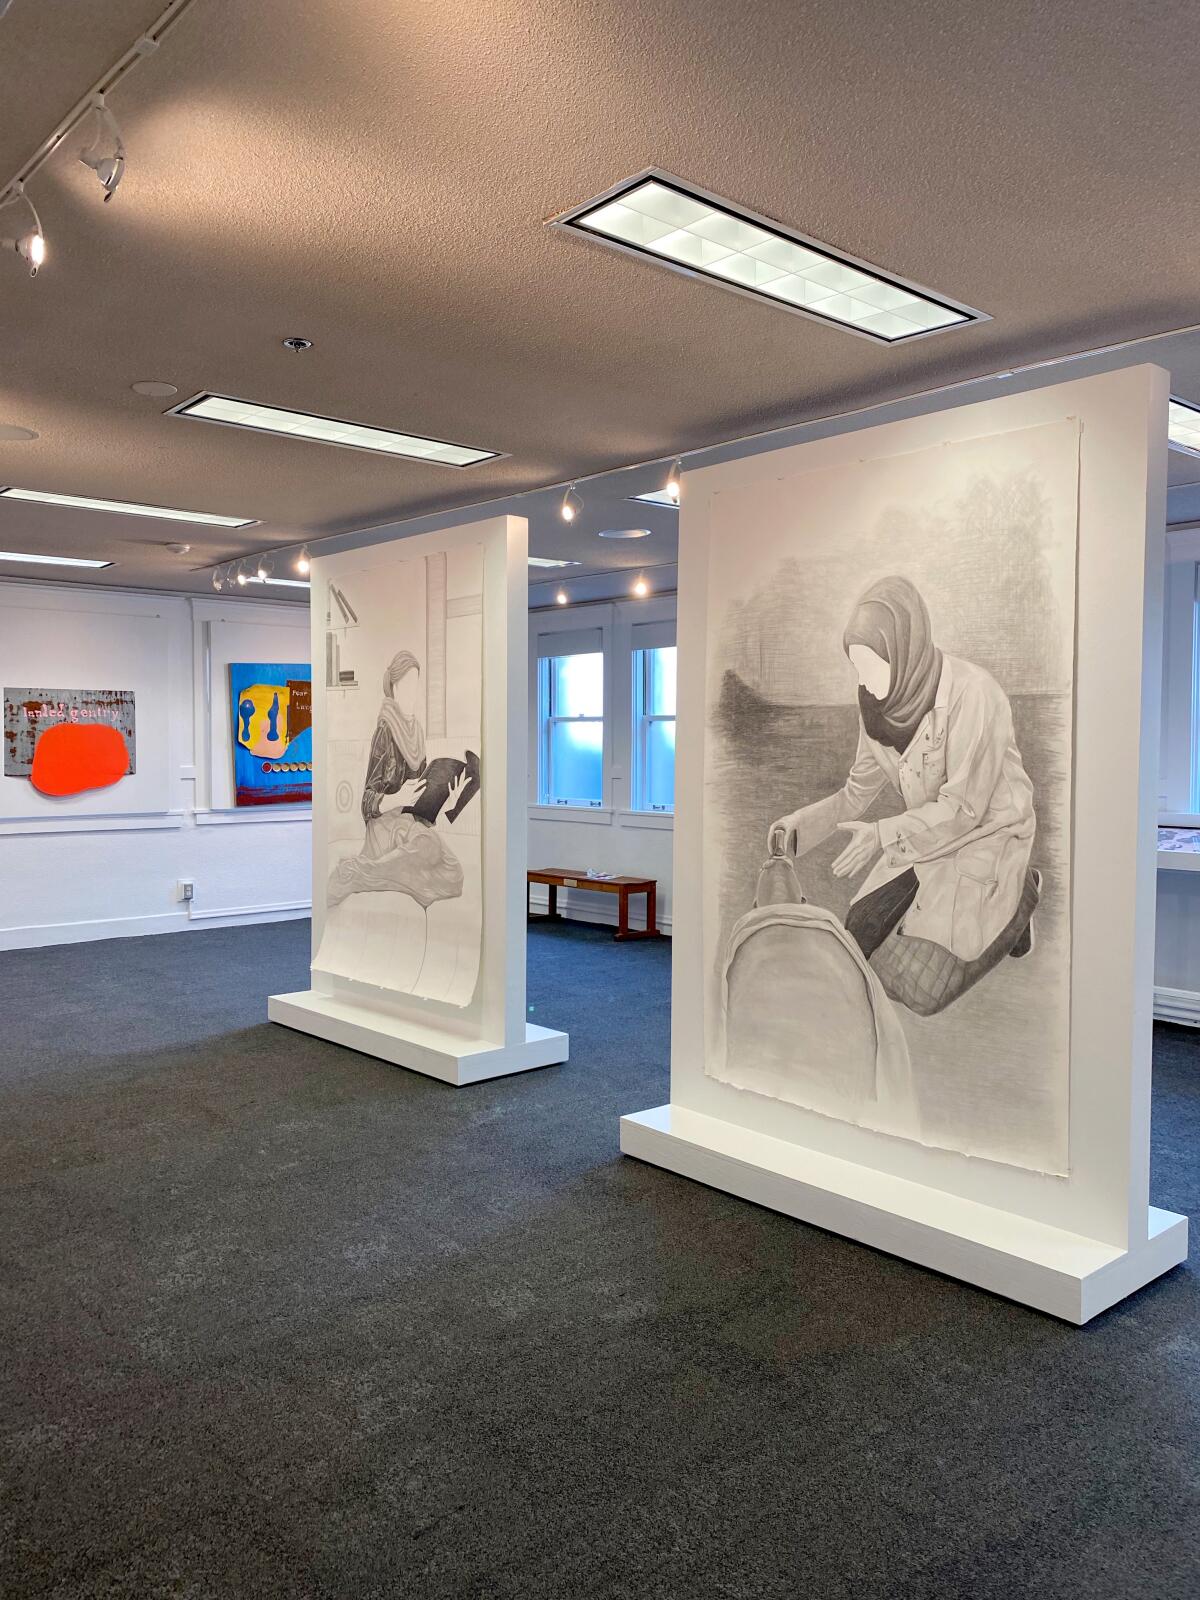 At the center, drawings by Yara Almouradi and in the background paintings by Matt Key 